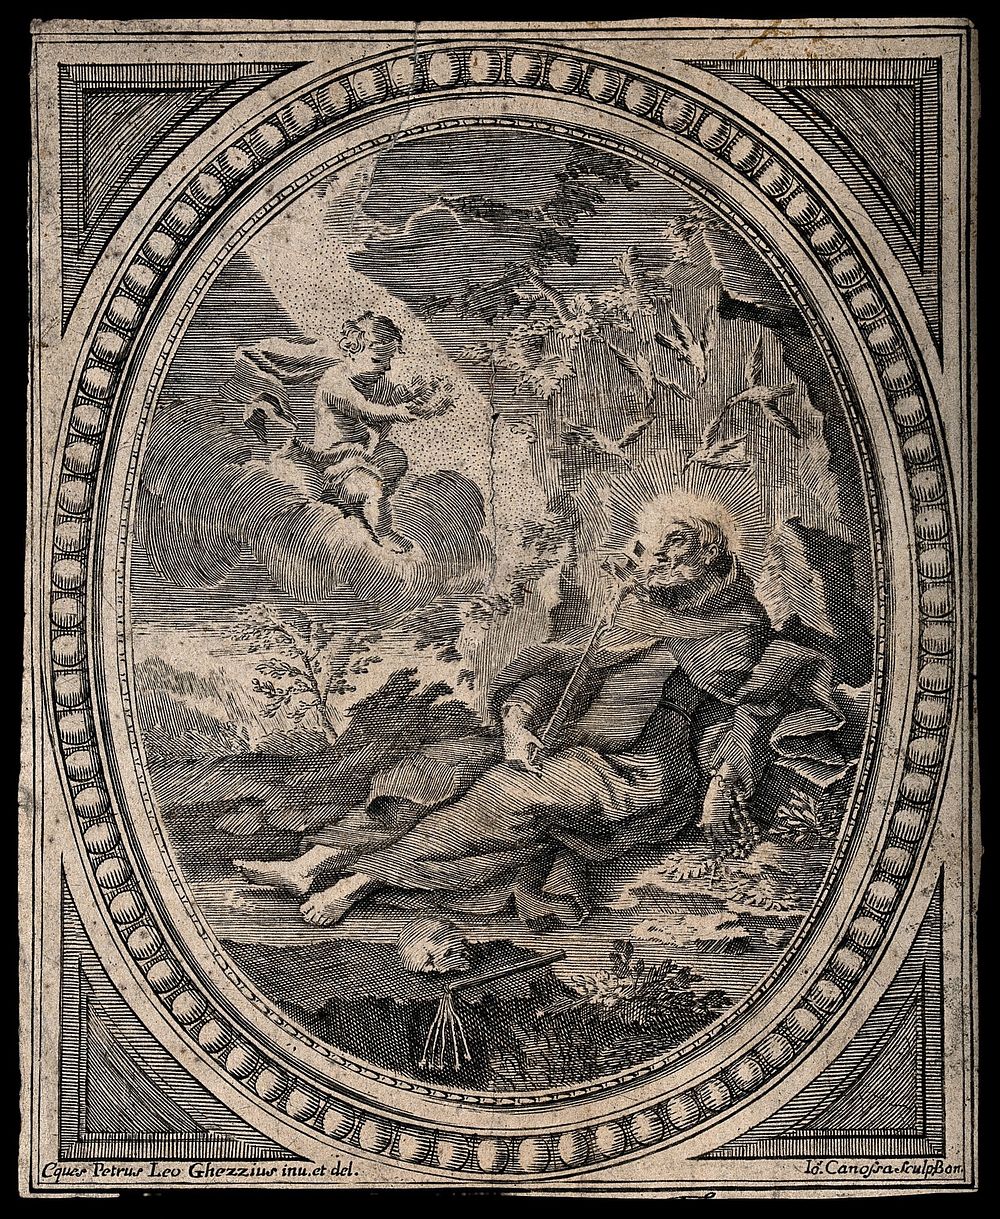 Saint Francis of Assisi  lying on the ground, looking at an angel on a cloud. Engraving by G.B. Canossa after P.L. Ghezzi…